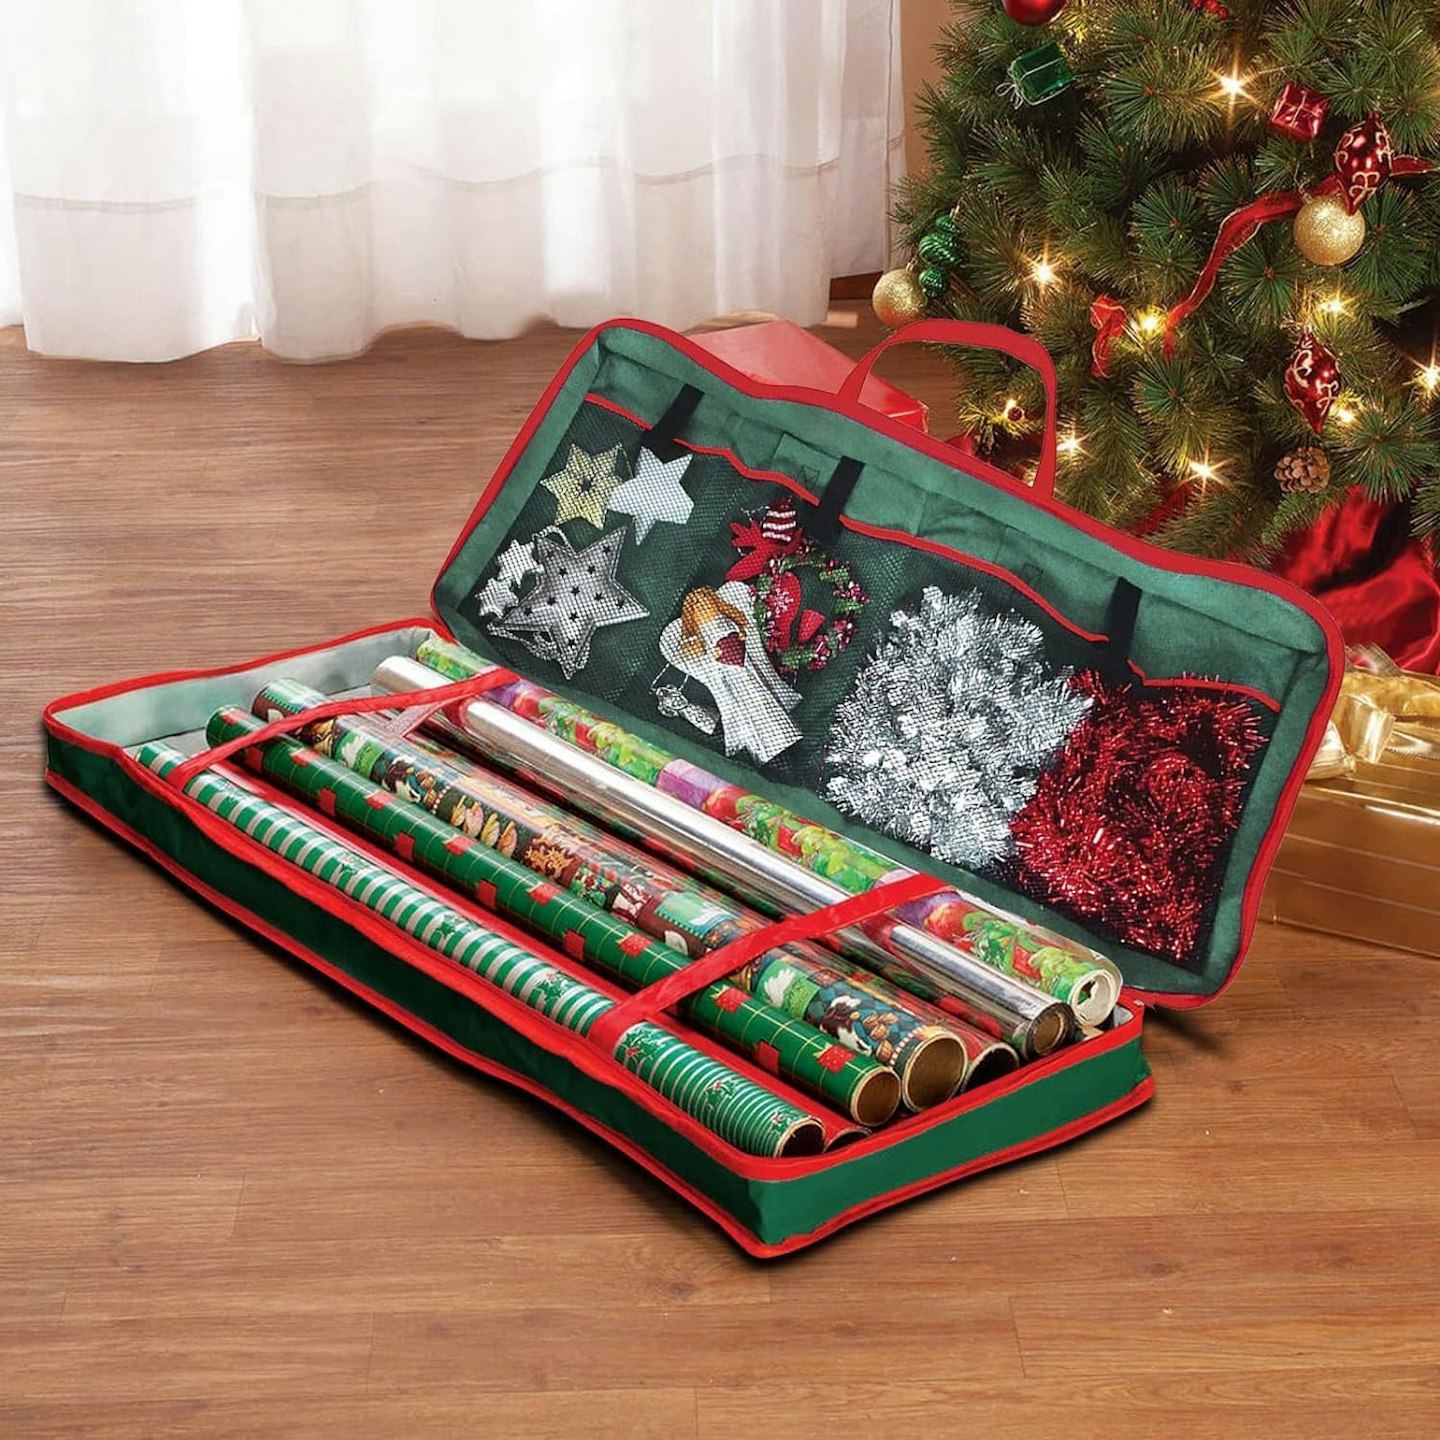 storage for wrapping paper 